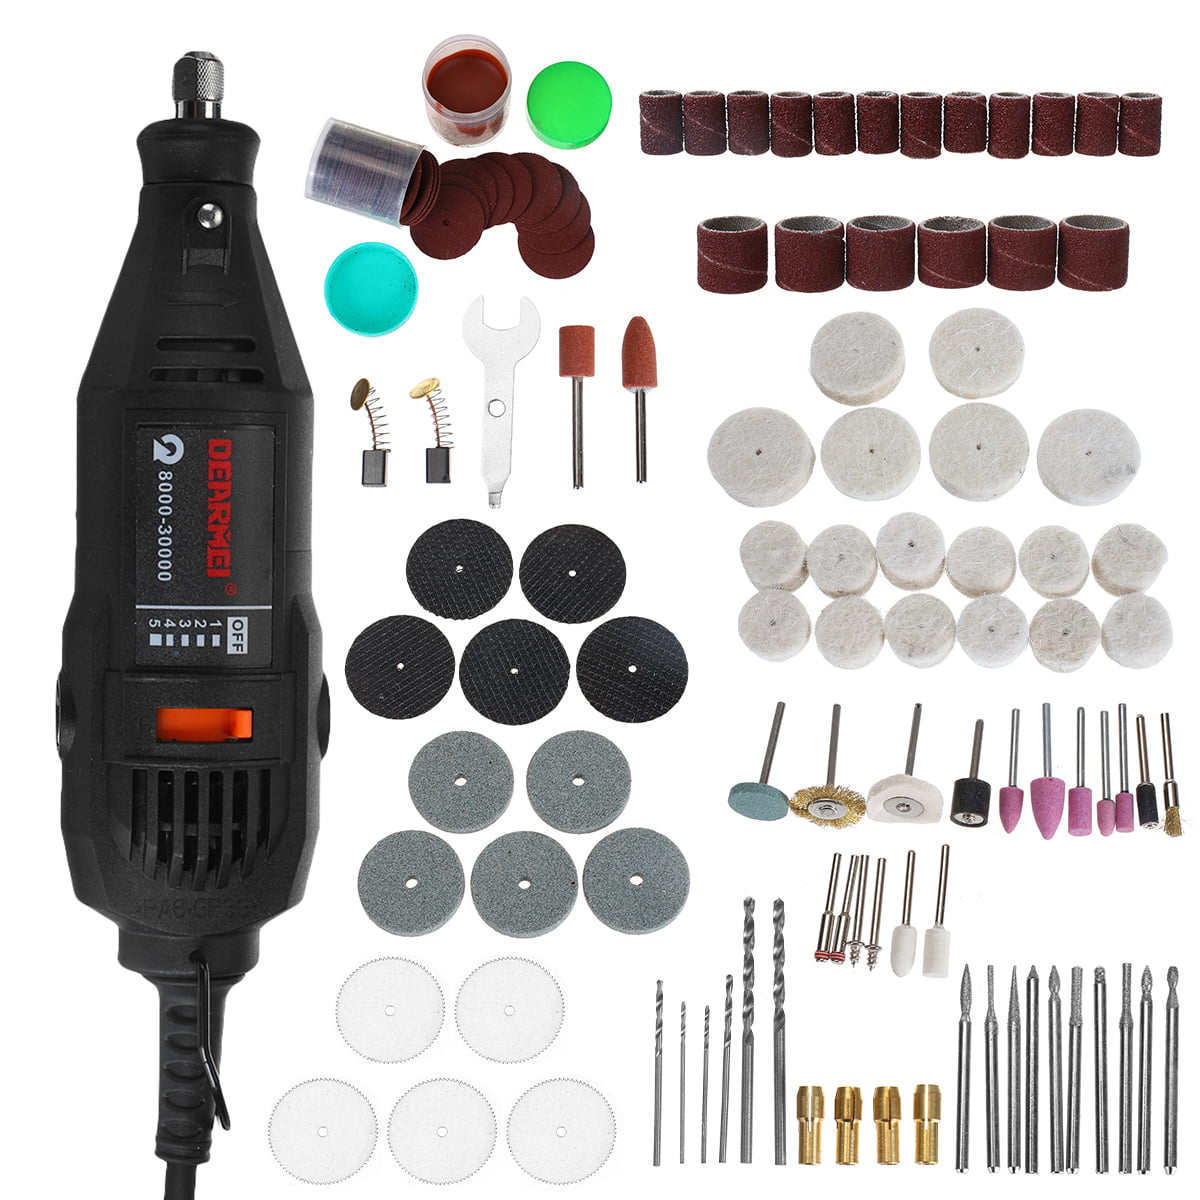 Cordless Drill Power Tools Electric Mini Drill Grinding Accessories Set 3.6V 